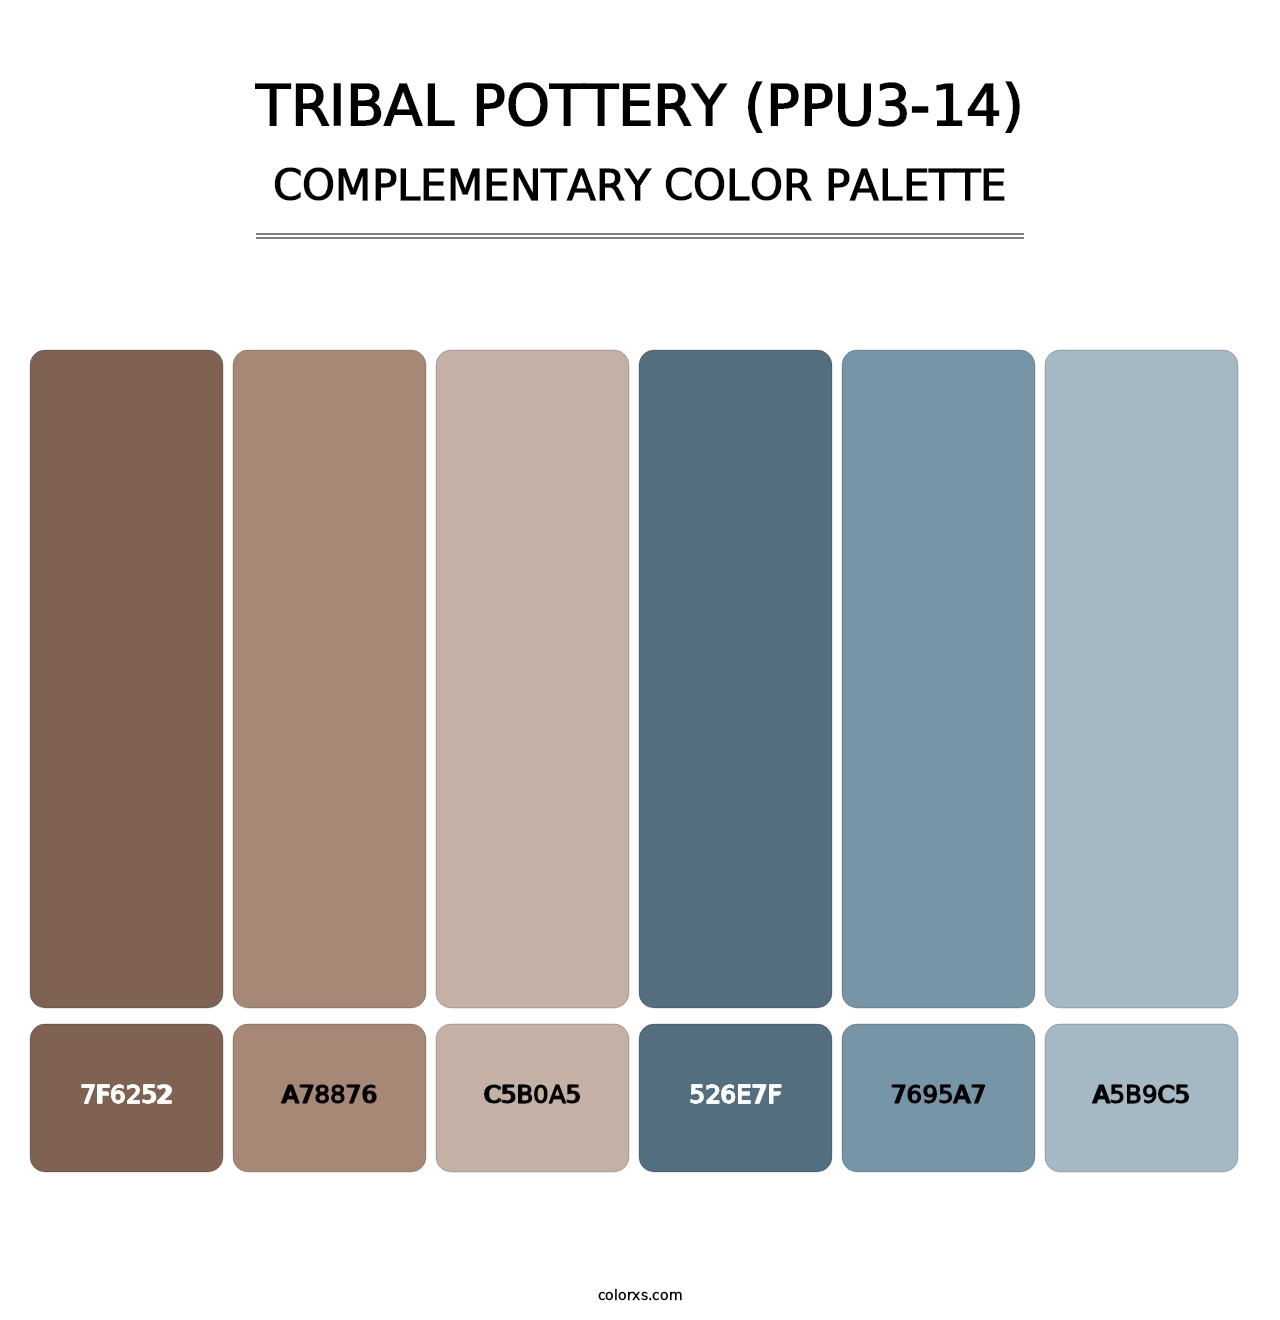 Tribal Pottery (PPU3-14) - Complementary Color Palette